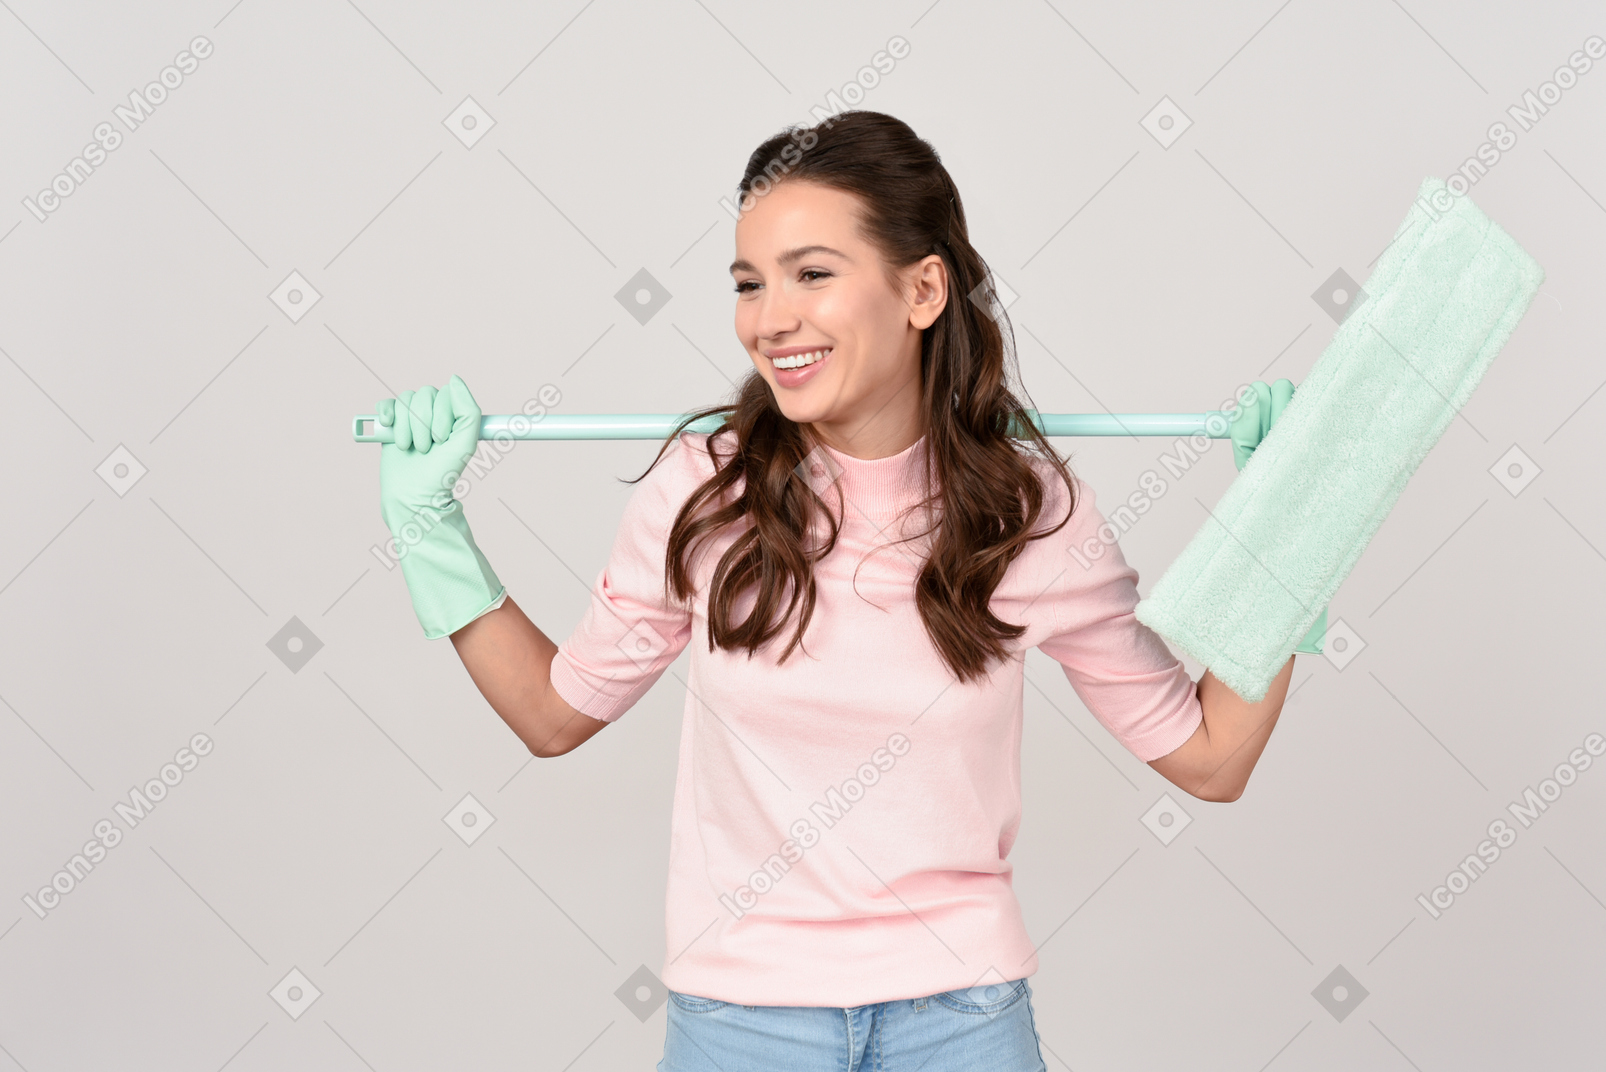 Attractive young woman holding a mop